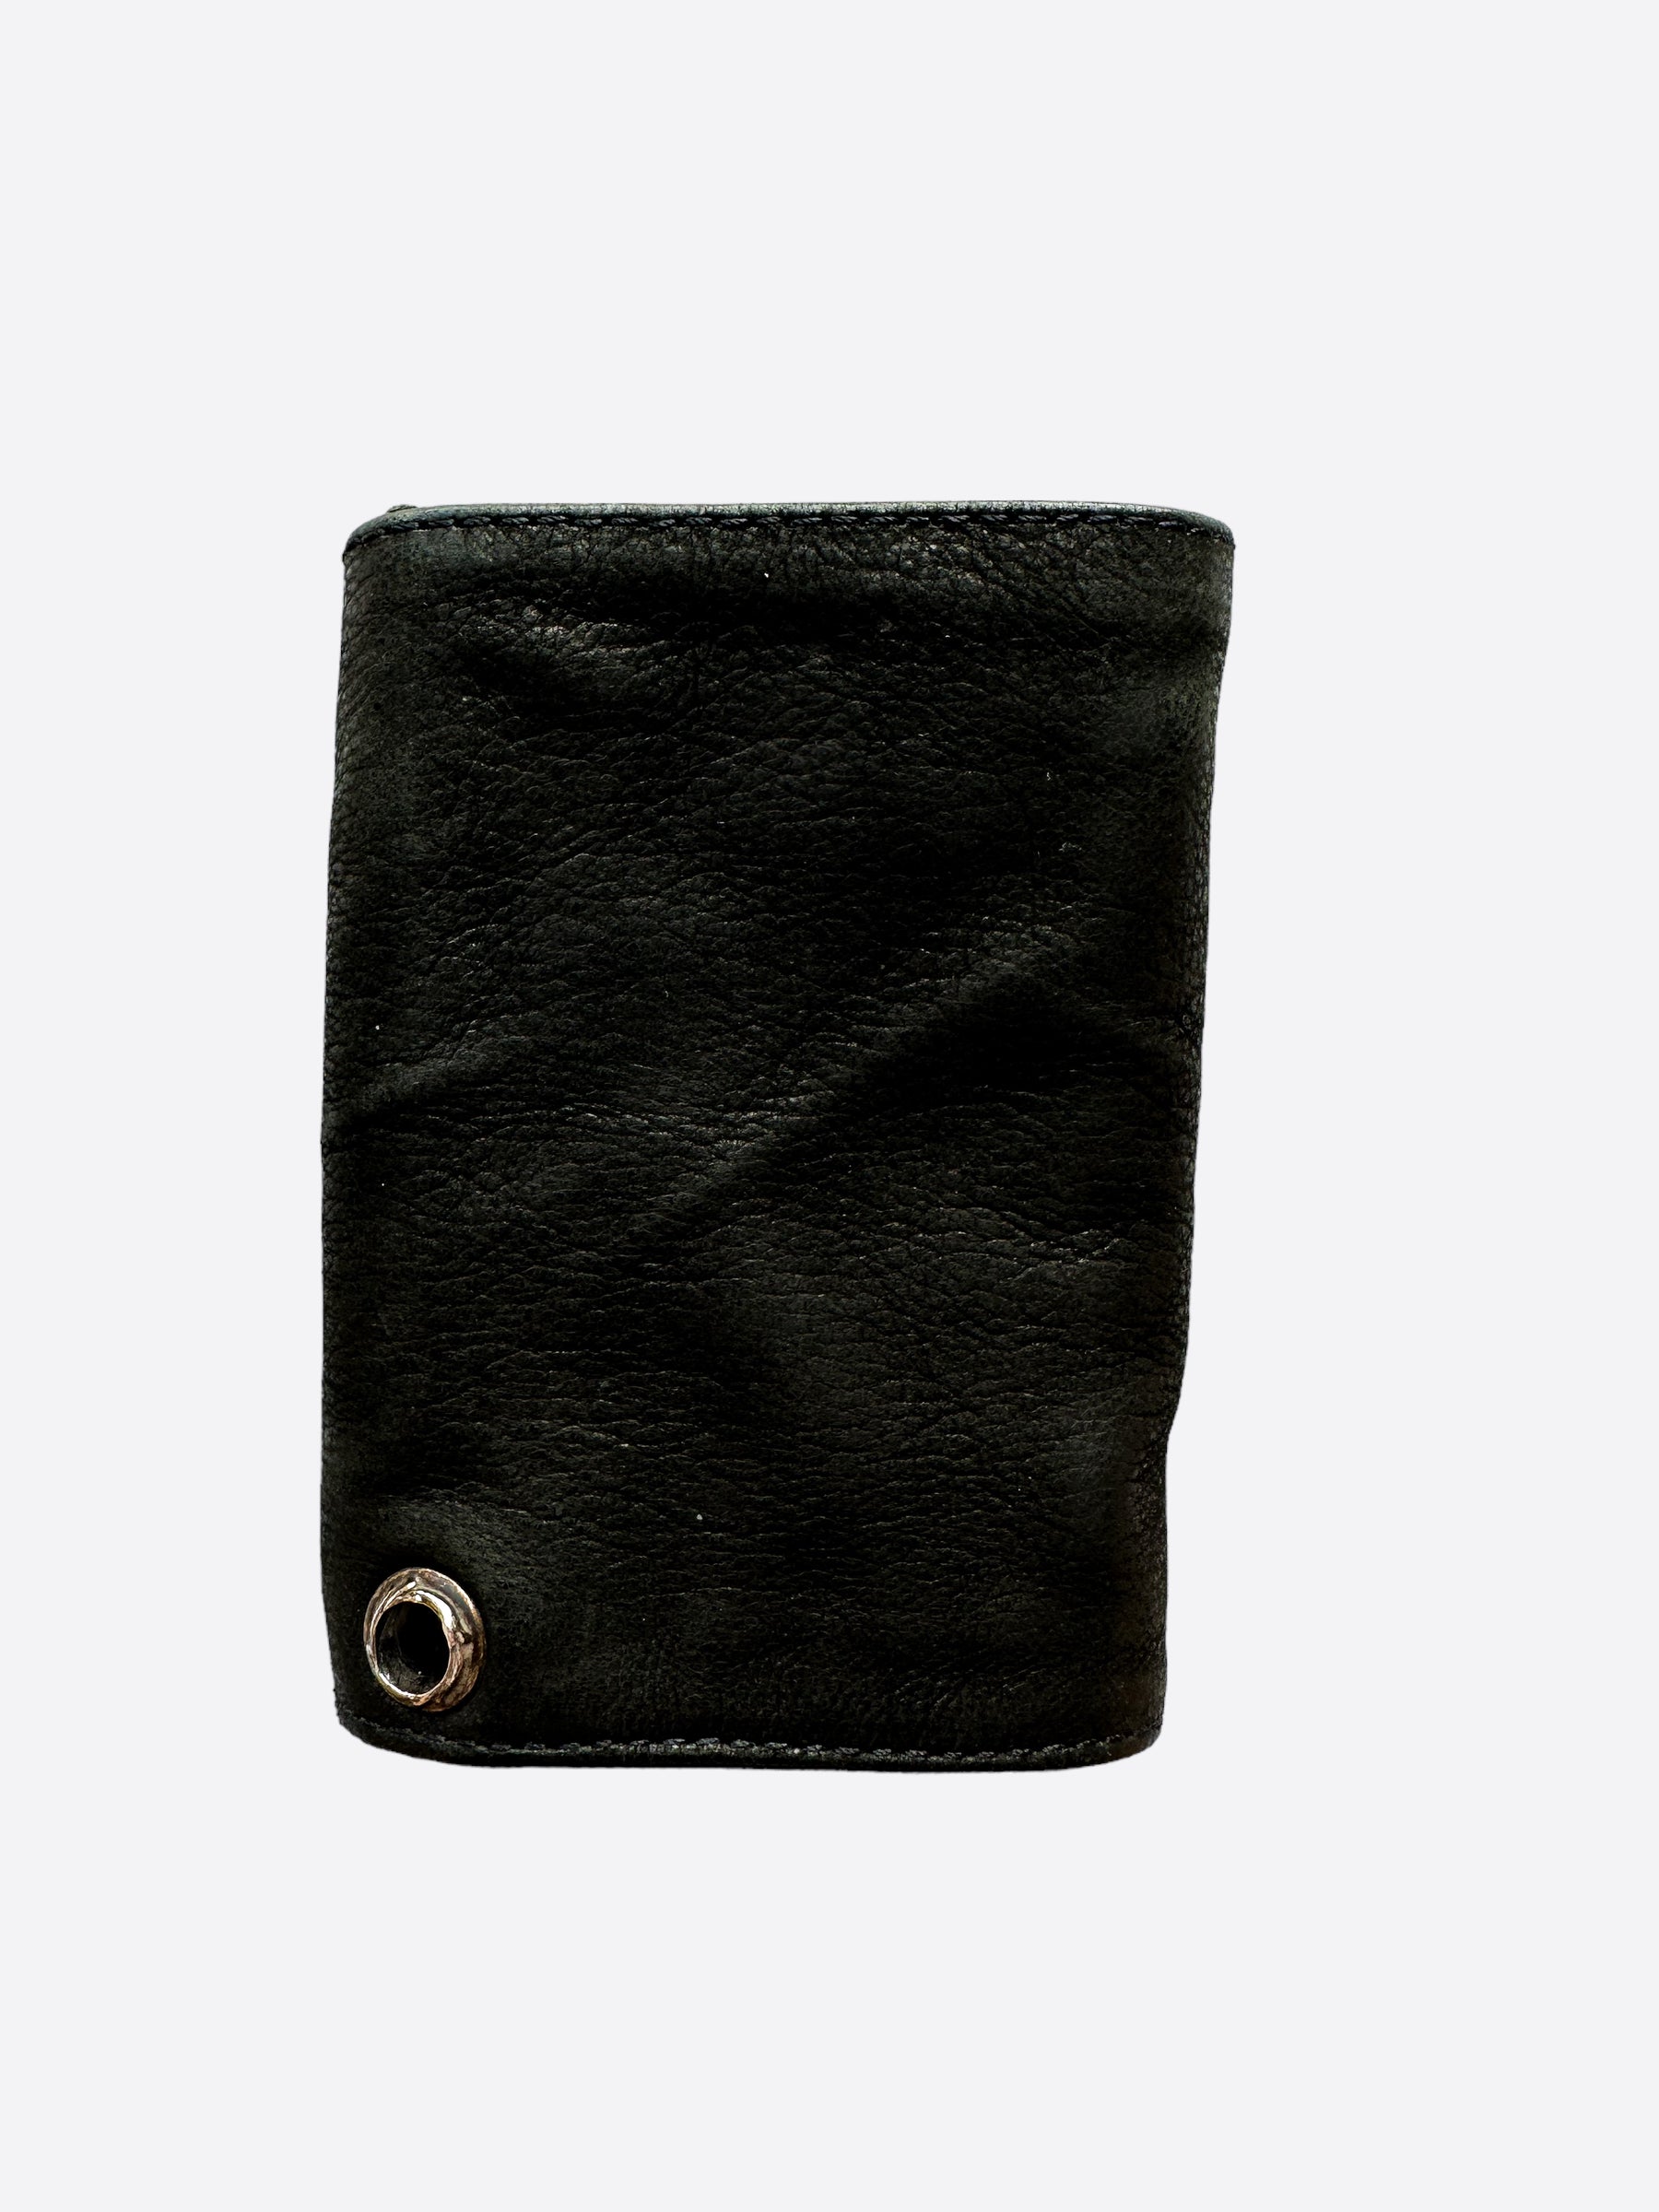 Buy Black With Reflective Chrome Print Trifold Wallet Online – Urban Monkey®